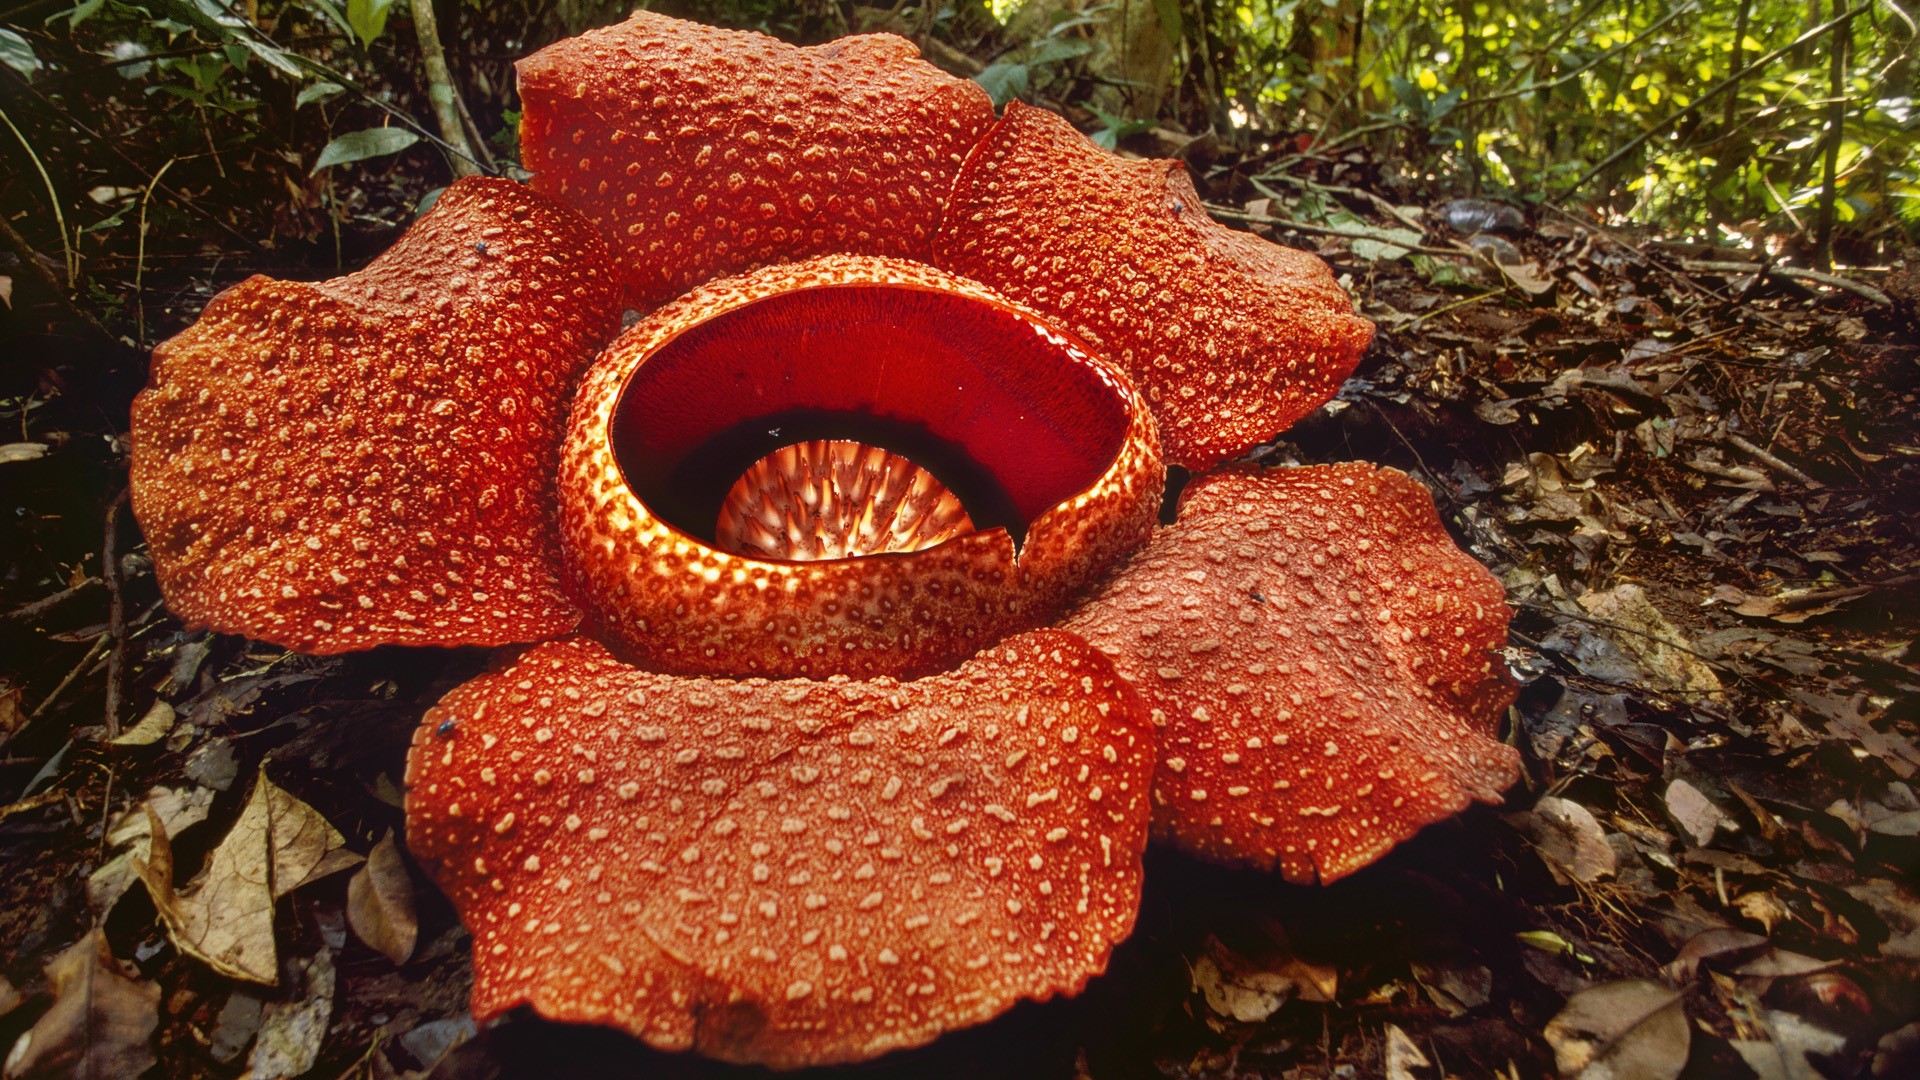 Huge Flower in Malaysia National Park - Wallpaper #41428